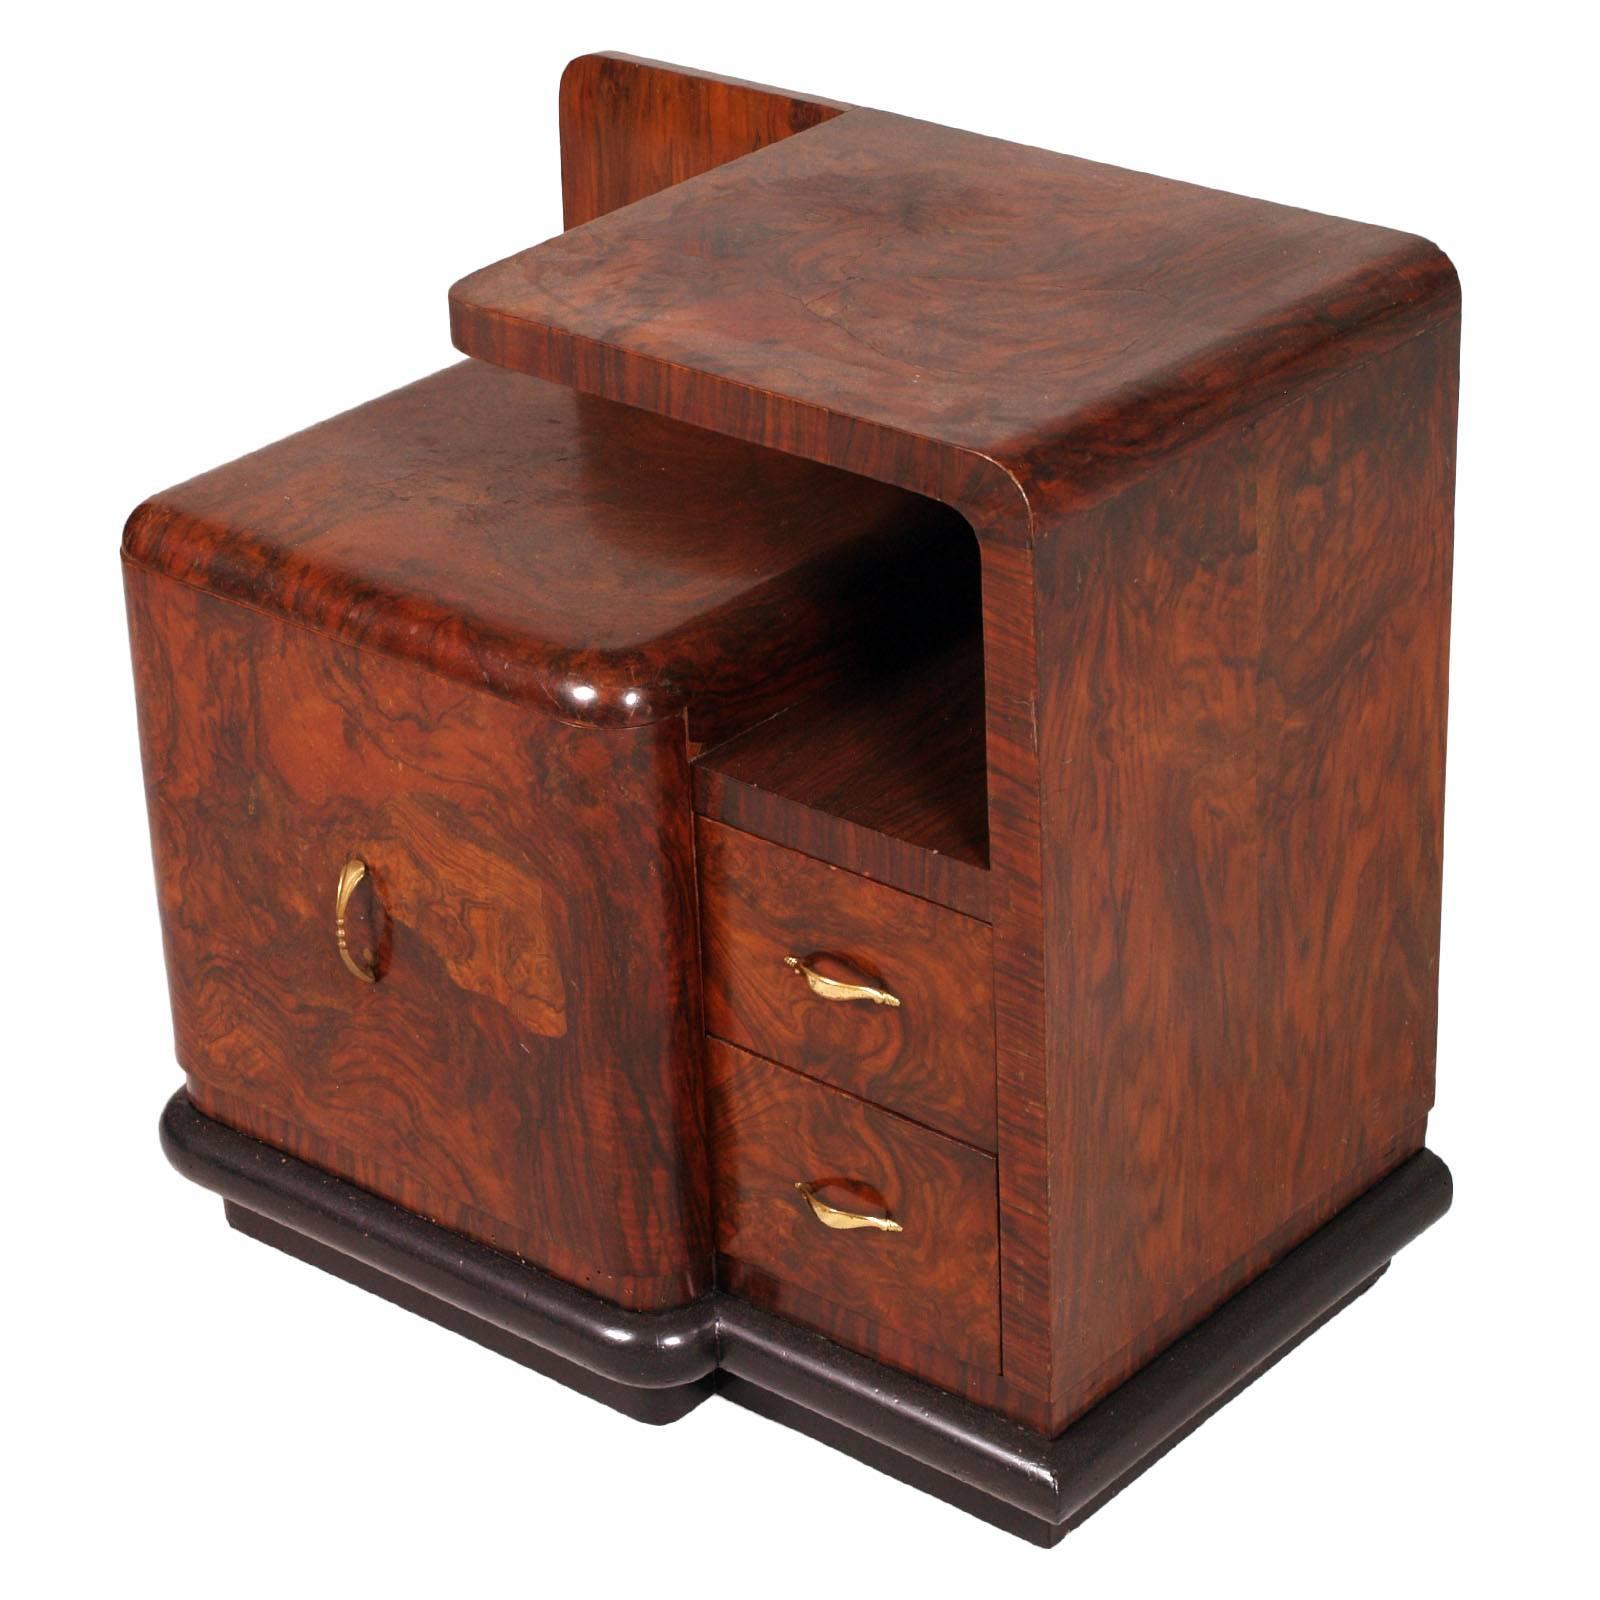 Italian, CANTU' area, bedside table, cabinet, Art Deco nightstand, walnut and burr walnut, restored and polished to wax

Measures cm: H 65, W 65, D 43.